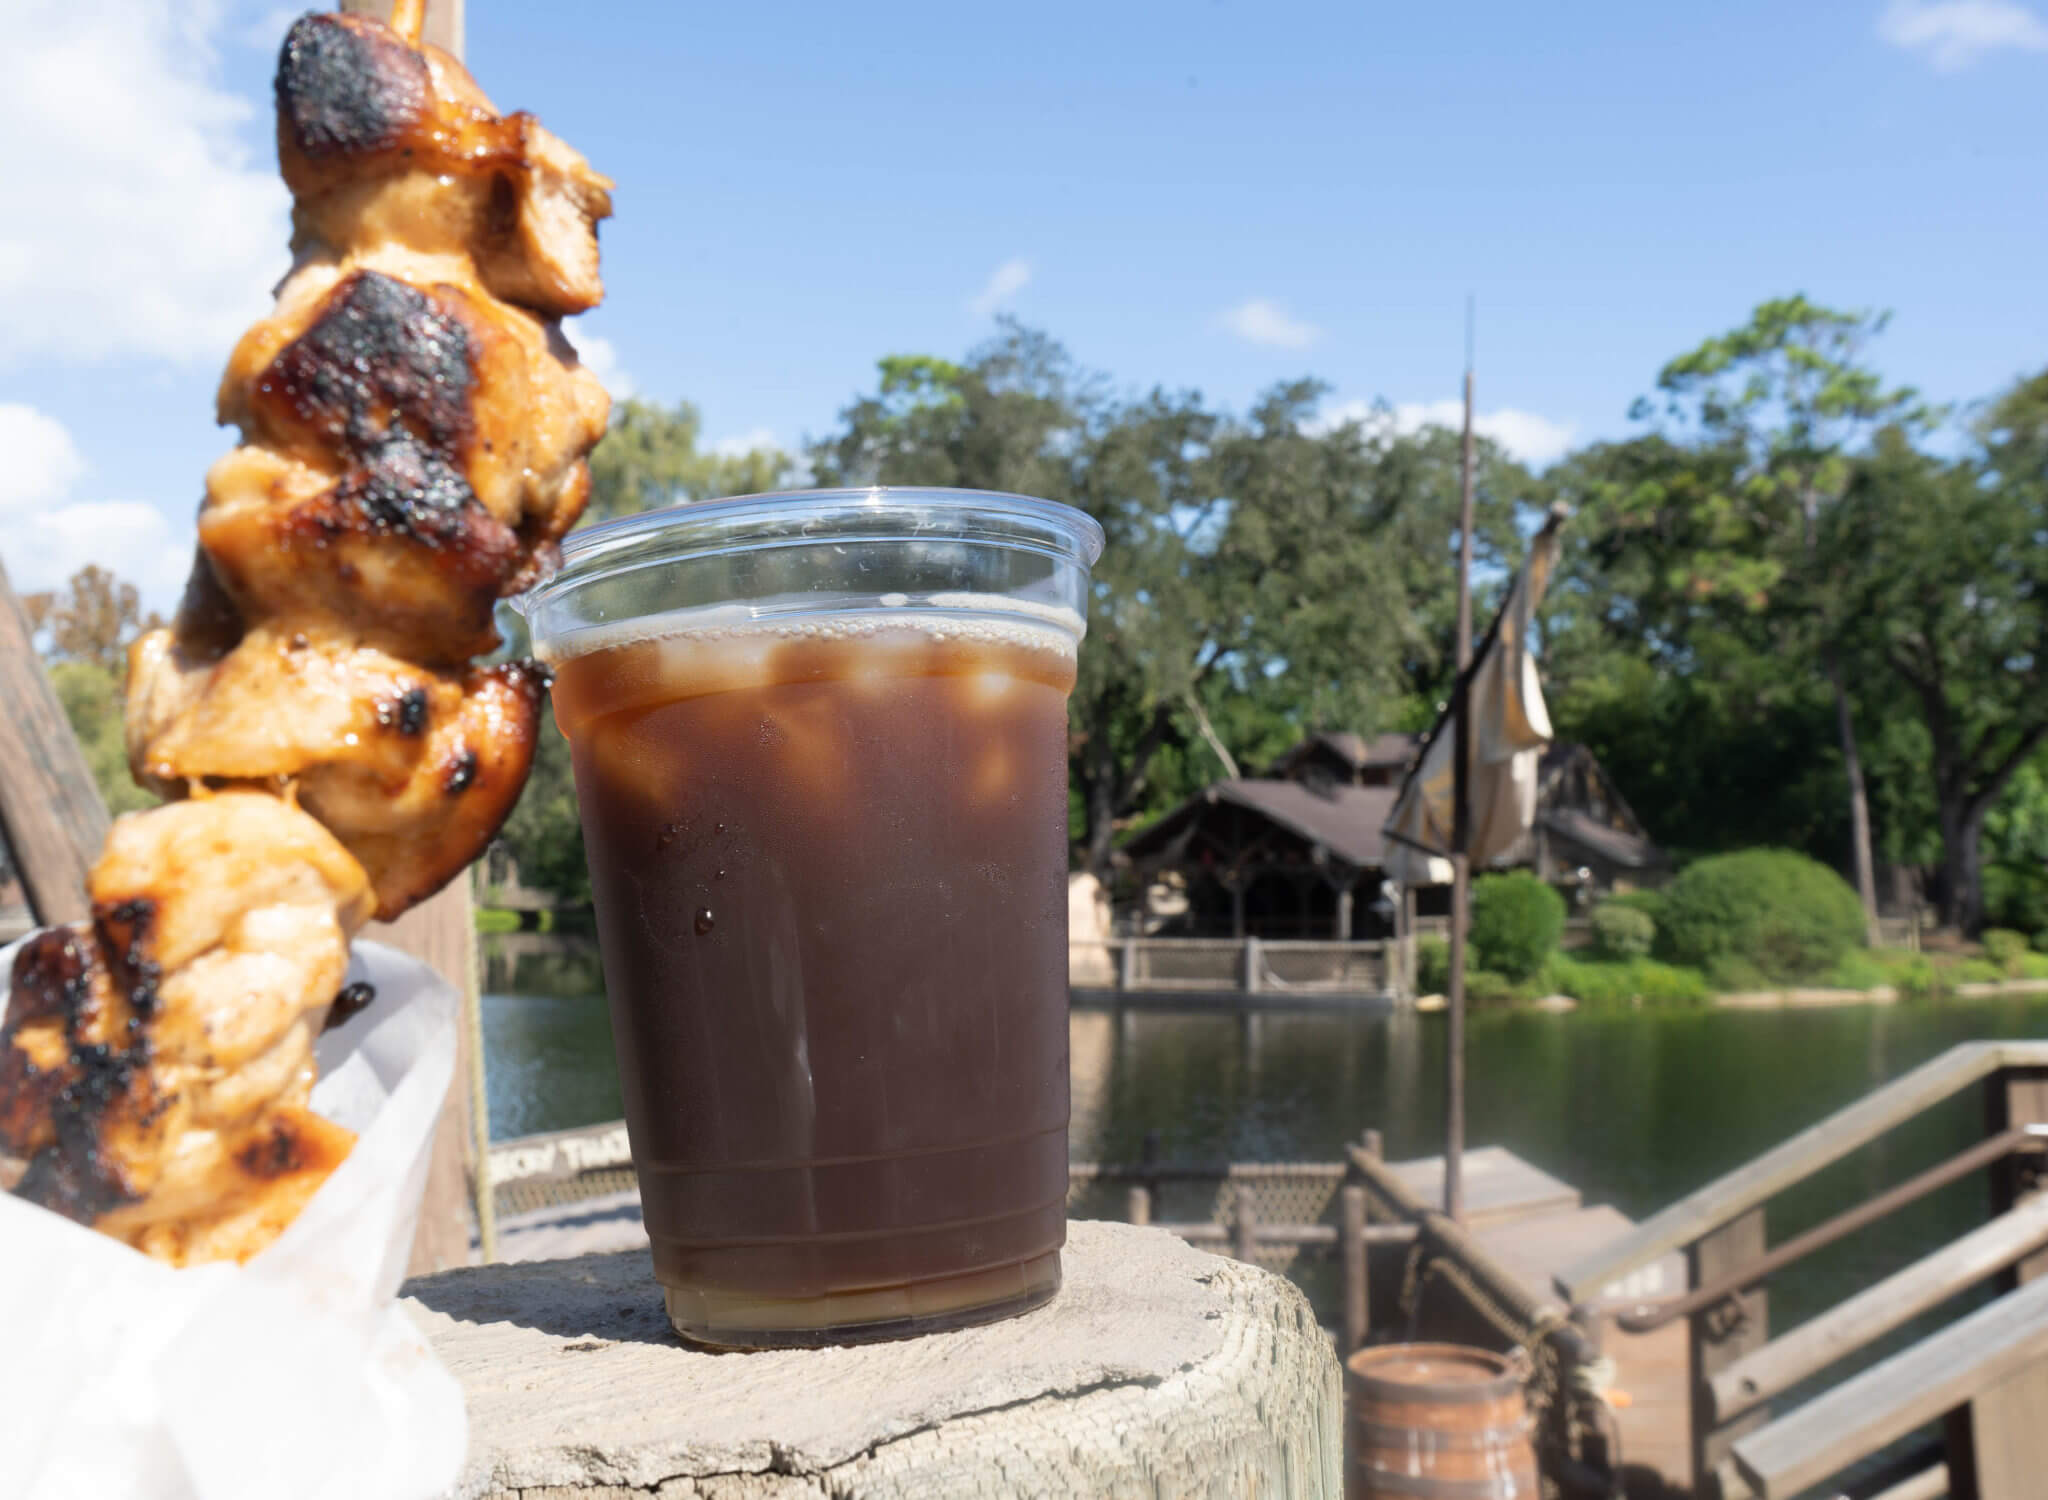 Chicken Skewer and Cold Brew Coffee from Westward Ho in Disney World's Magic Kingdom